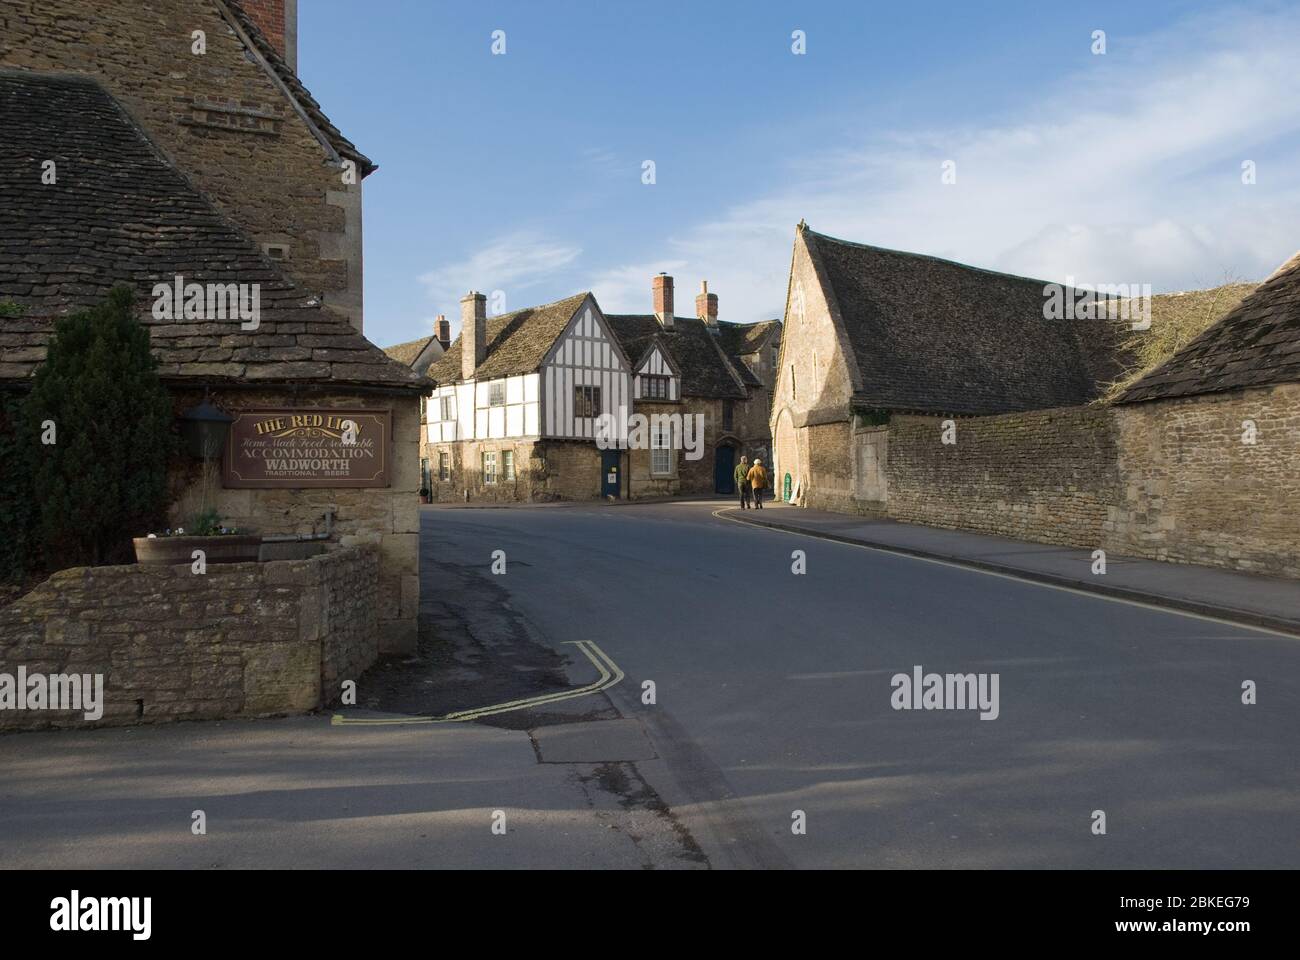 Conservation Heritage Preservation Old English Village Cotswolds Cotswold Stone Buildings Architecture Lacock Village Hither Way, Lacock, SN15 Stock Photo